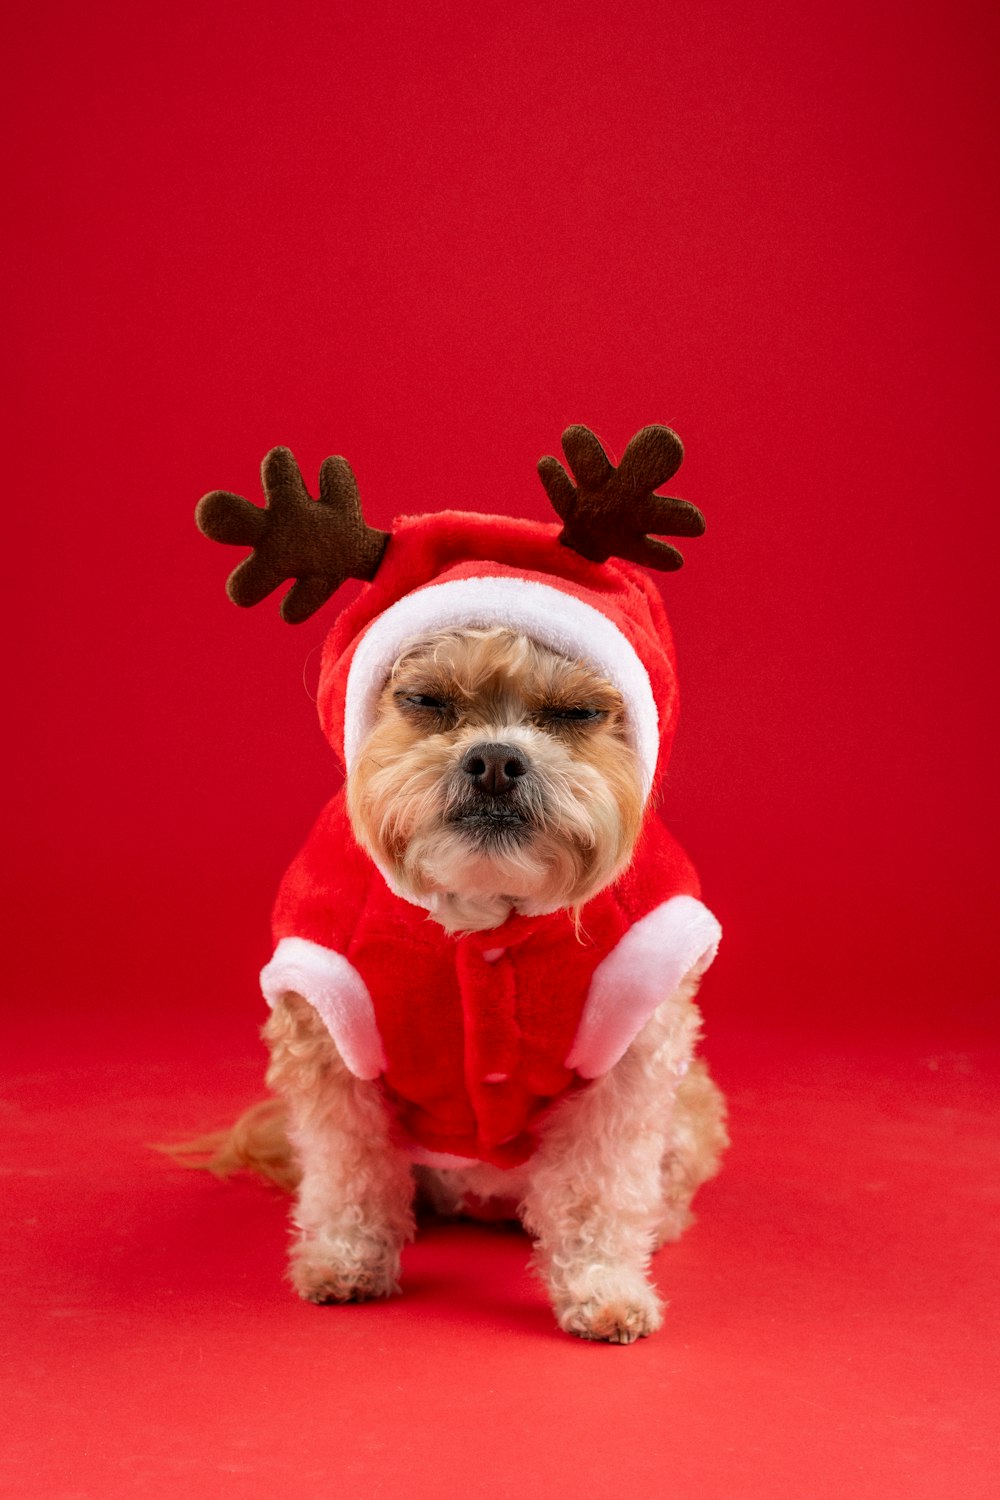 a small dog wearing a santa claus outfit